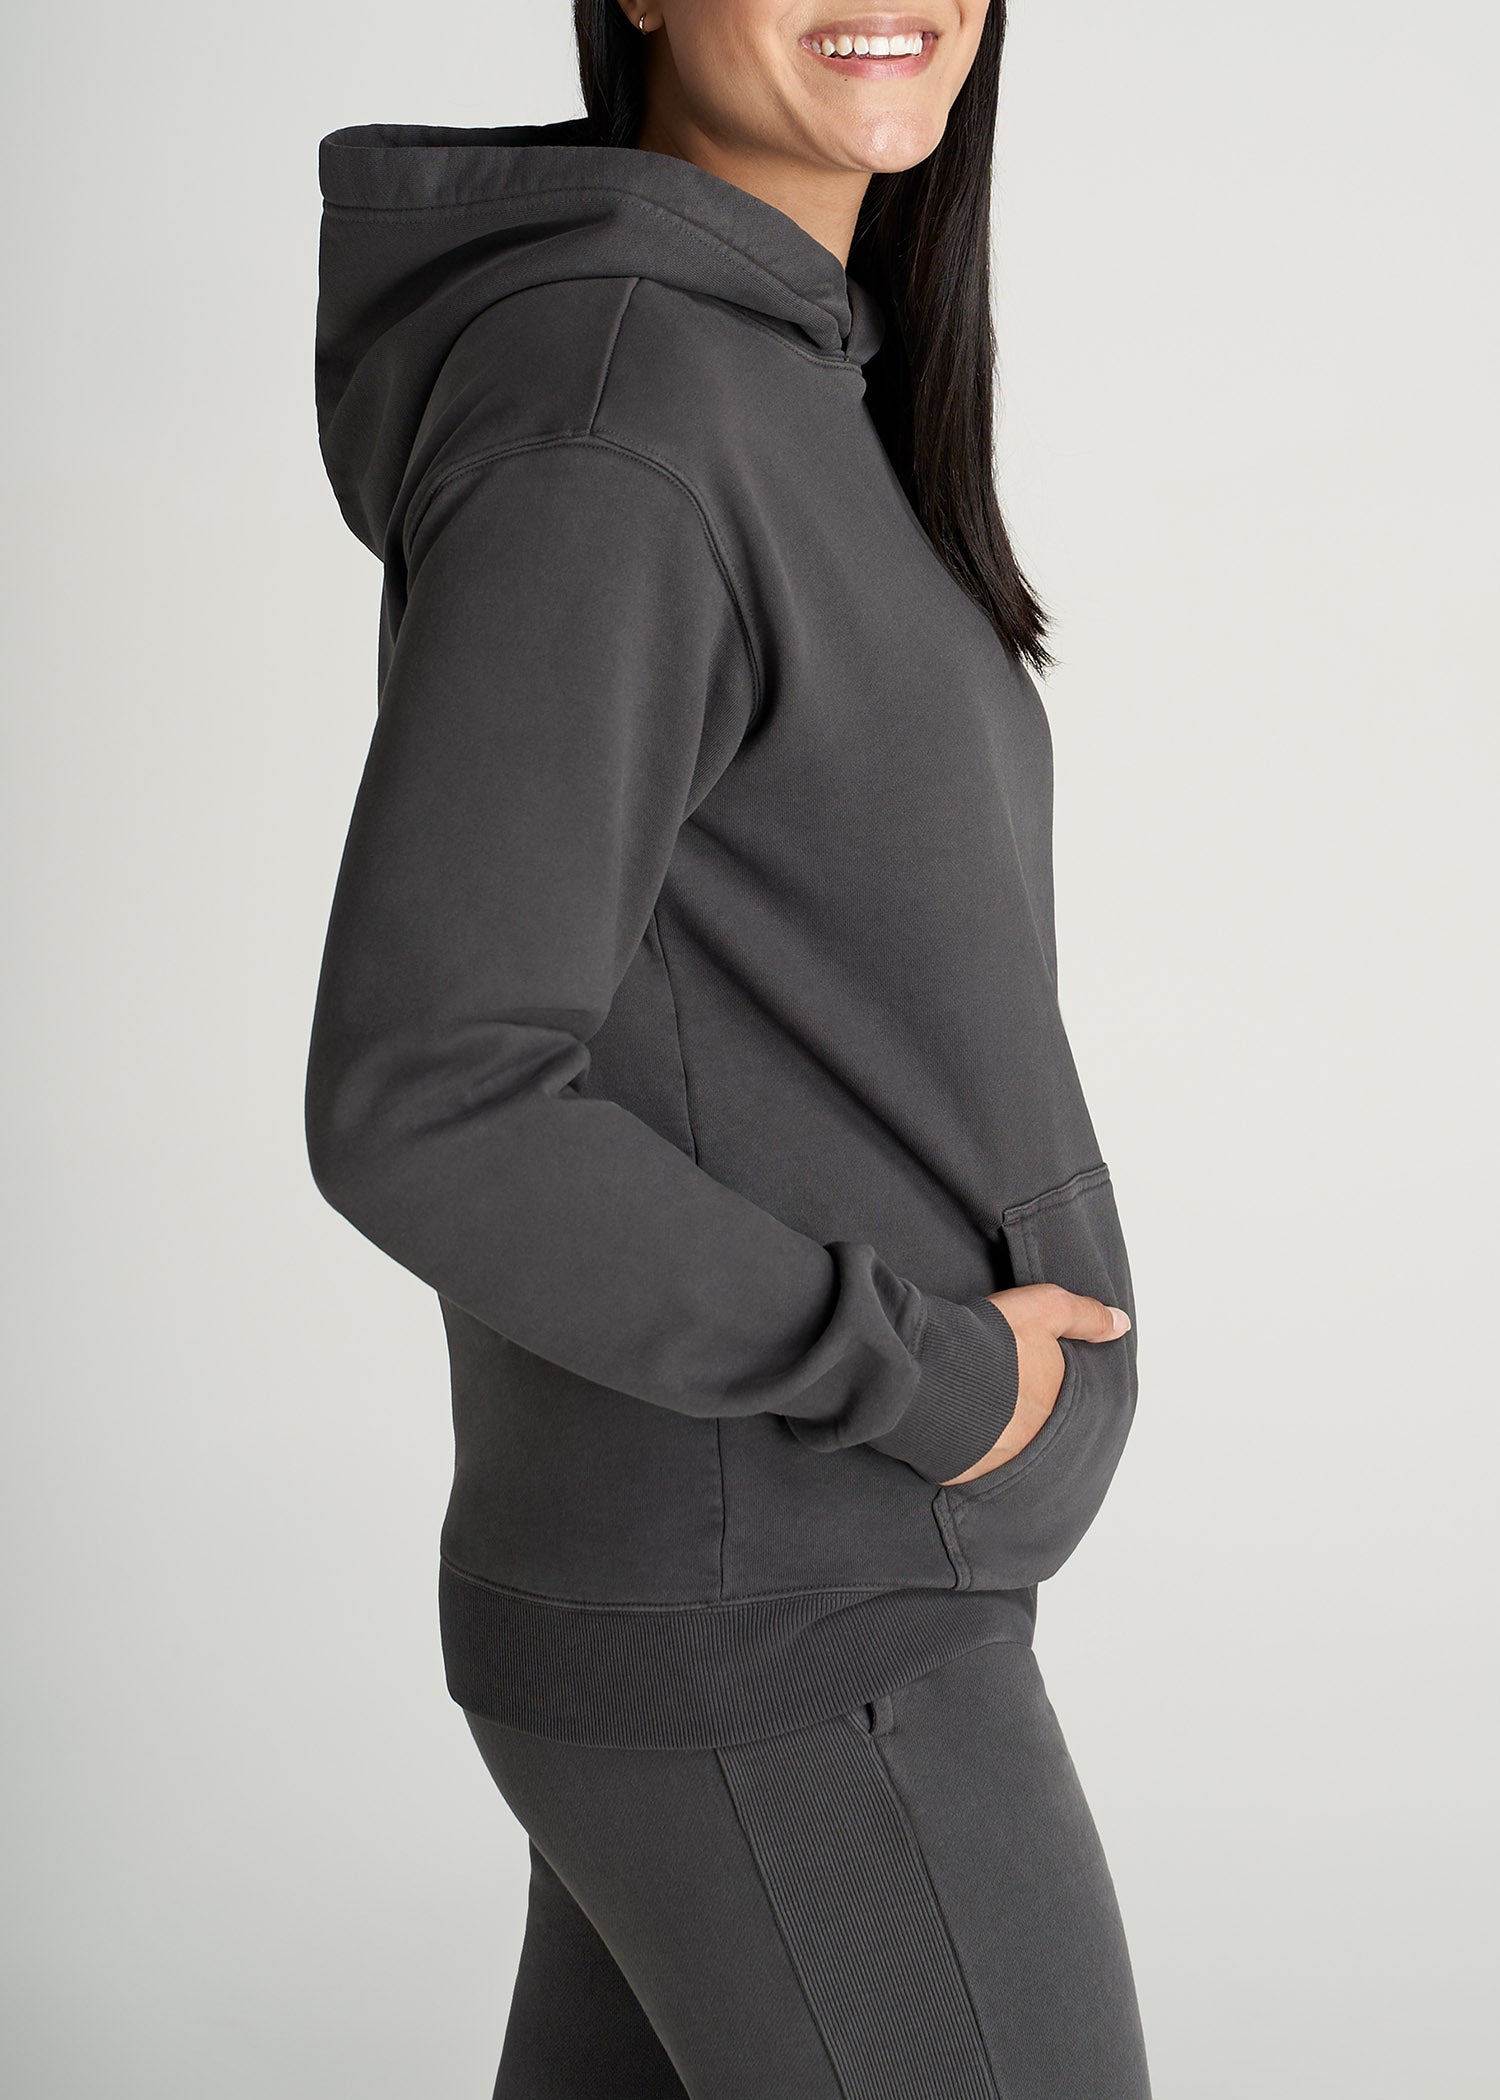 Women's Tall Wearever Cross-Over Garment Dyed Hoodie Charcoal